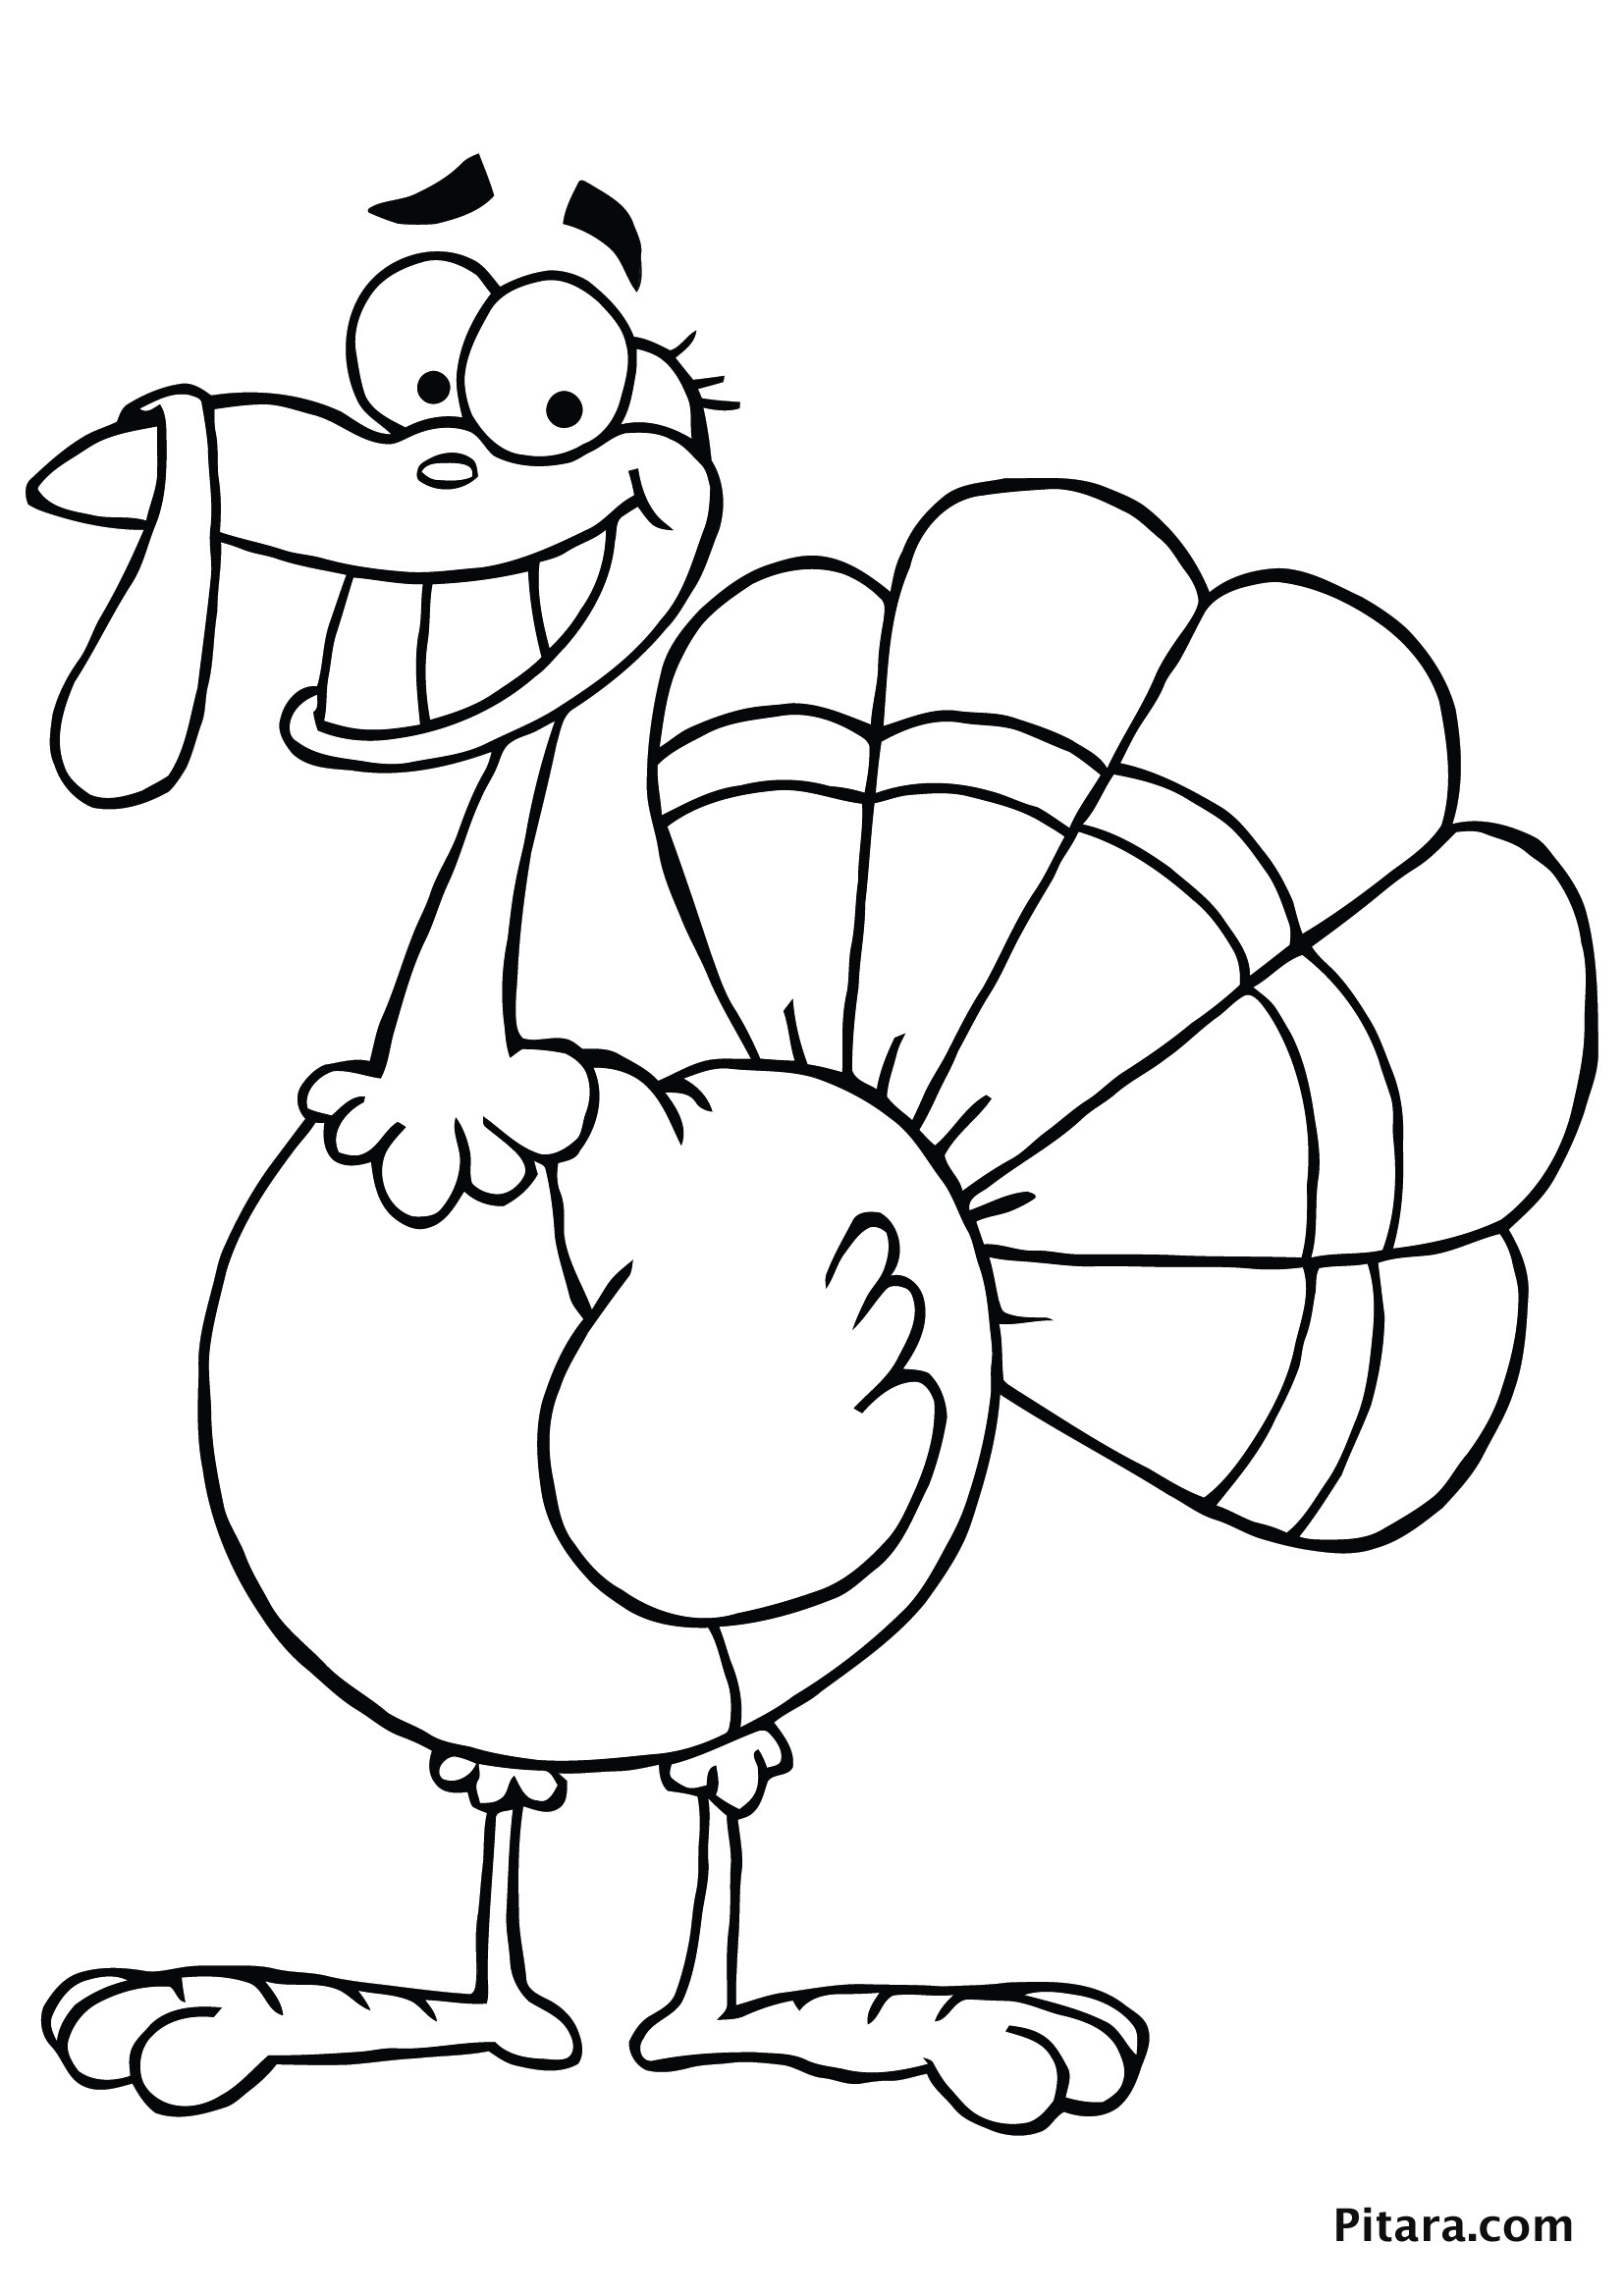 Thanksgiving Turkey Coloring Pages
 Turkey Coloring Pages for Kids